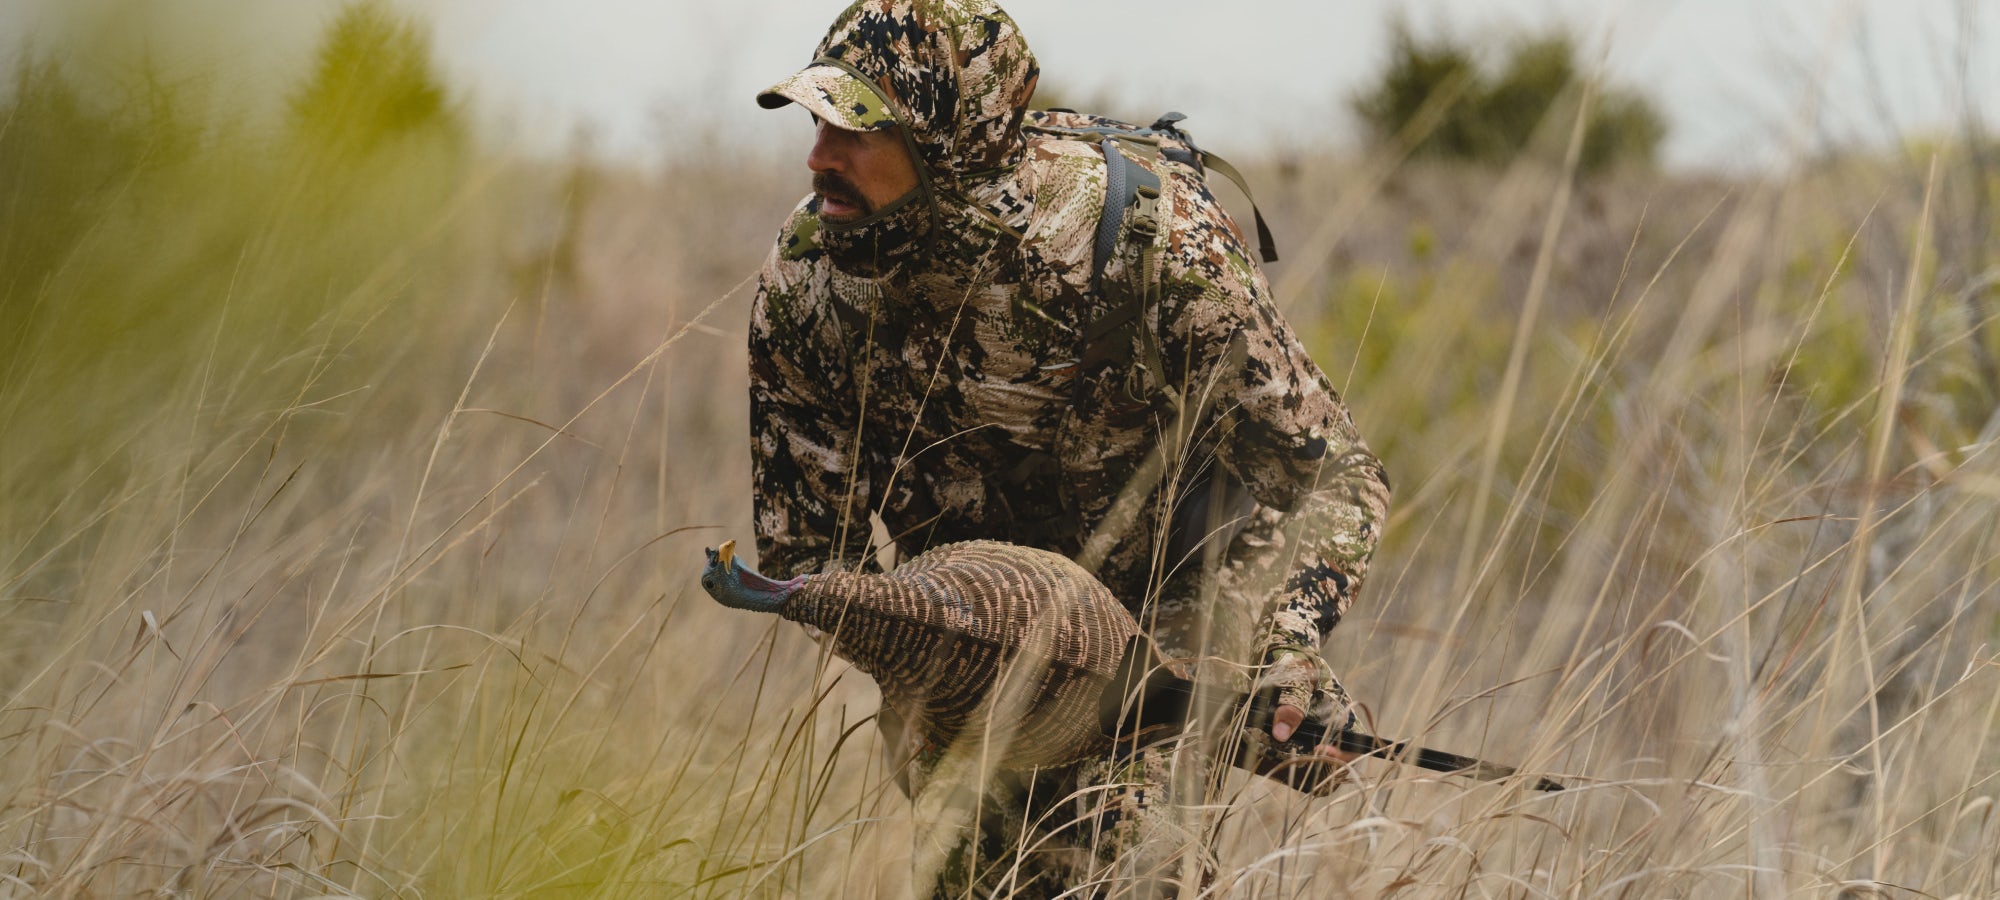 Man in the Equinox Guard System in Optifade Subalpine stalking throught the high grass after Turkey | SITKA Gear